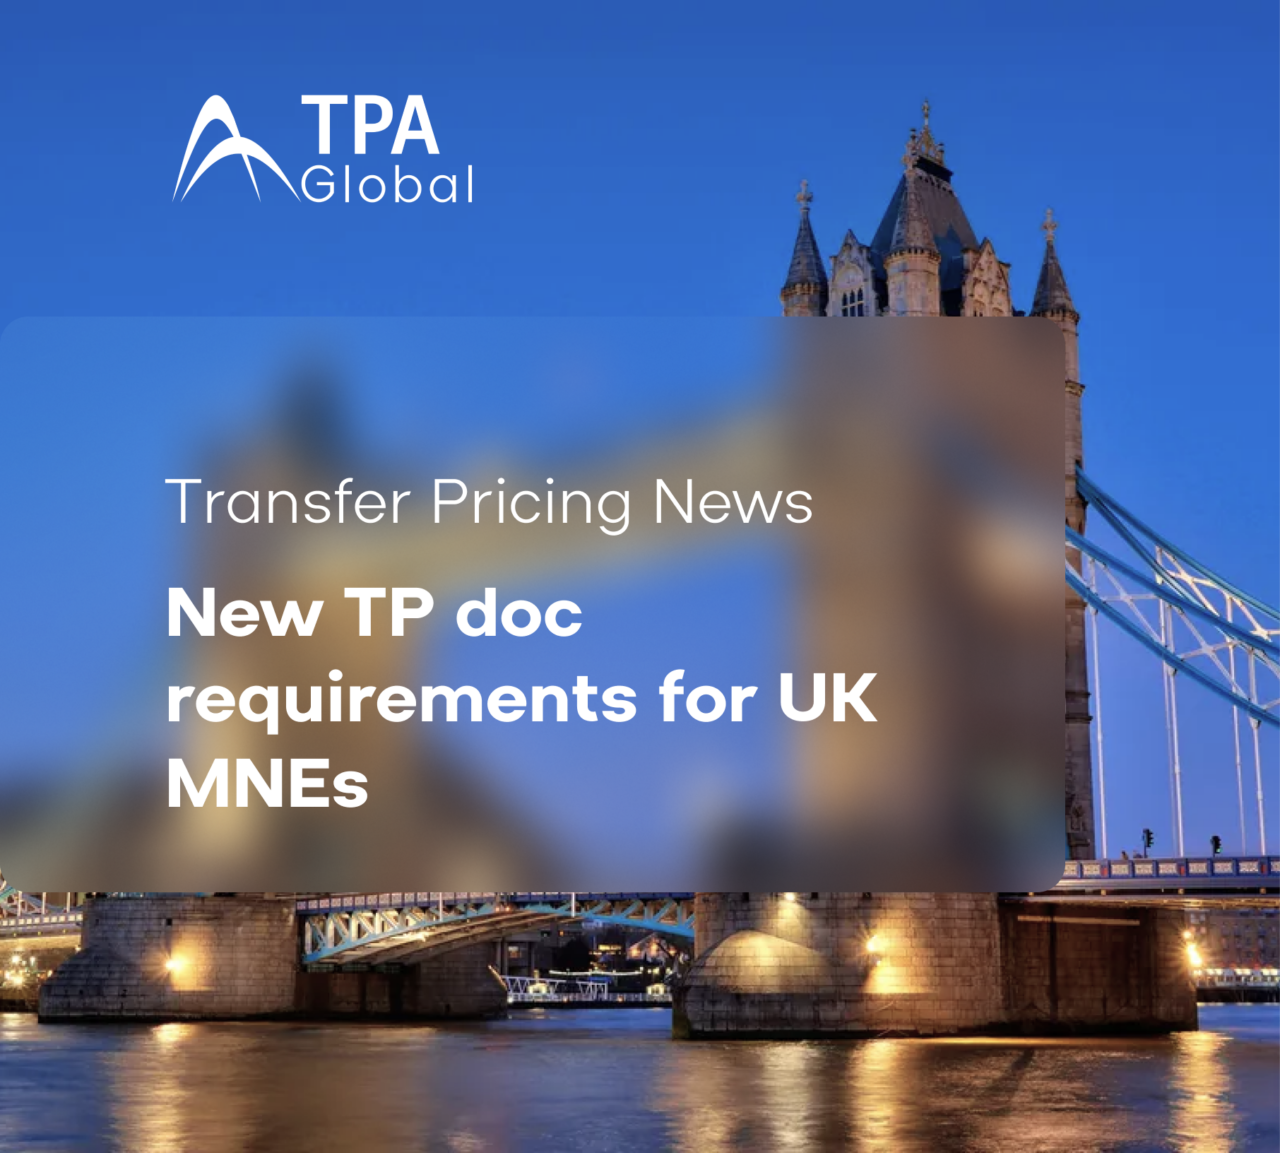 New TP doc requirements for UK MNEs